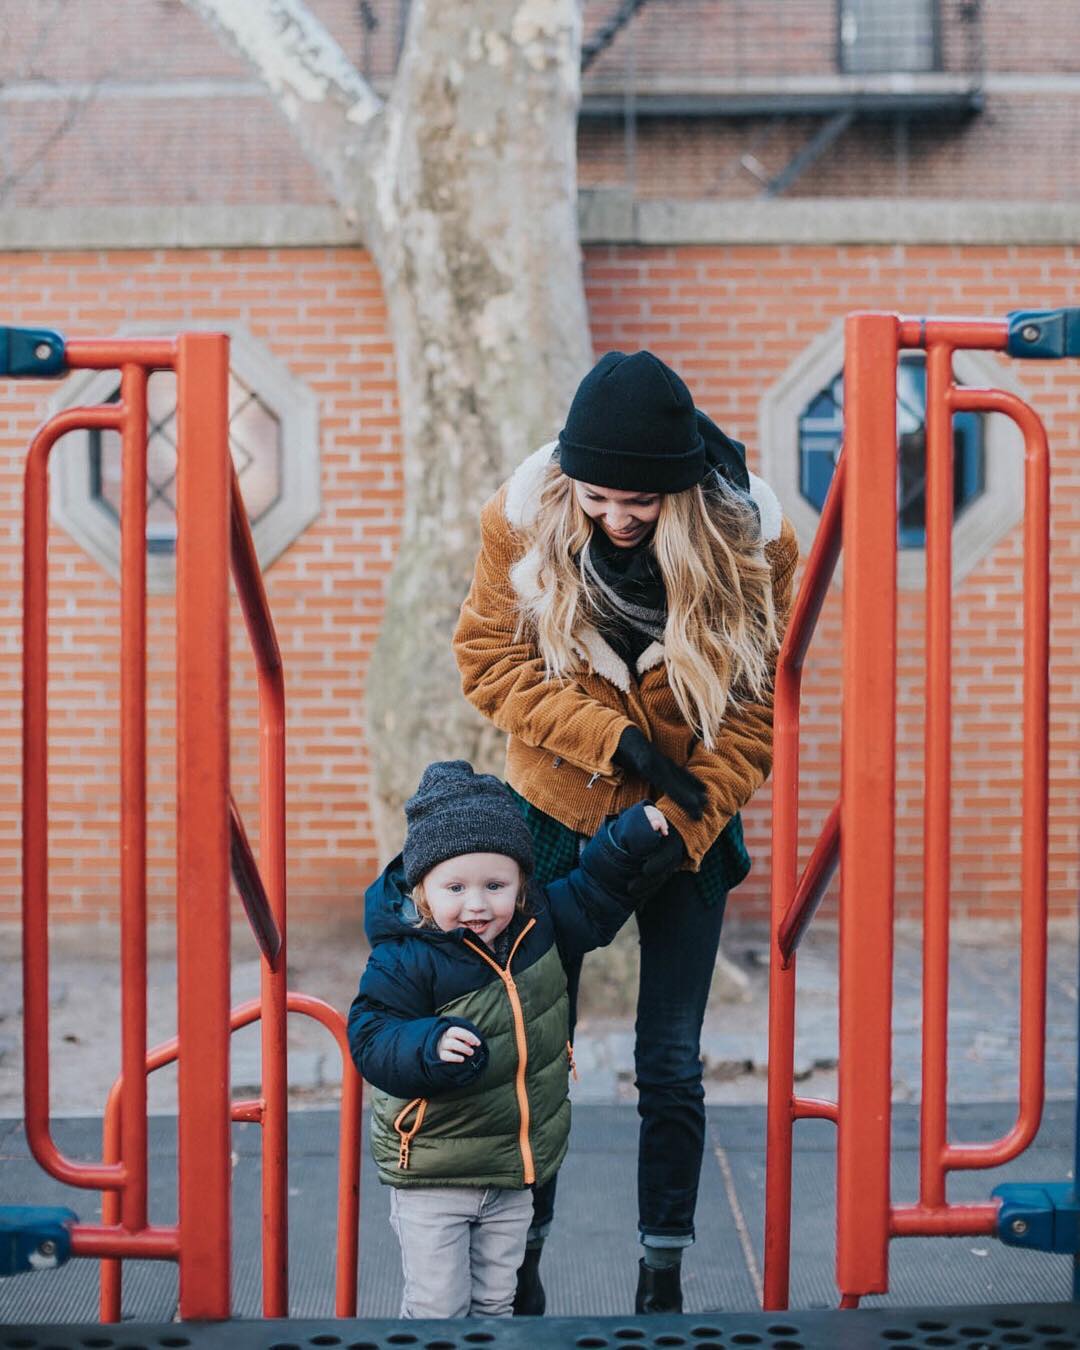 Woman Leading a Toddler Onto a Jungle Gym. Photo by Instagram user @hailey.marie.andresen